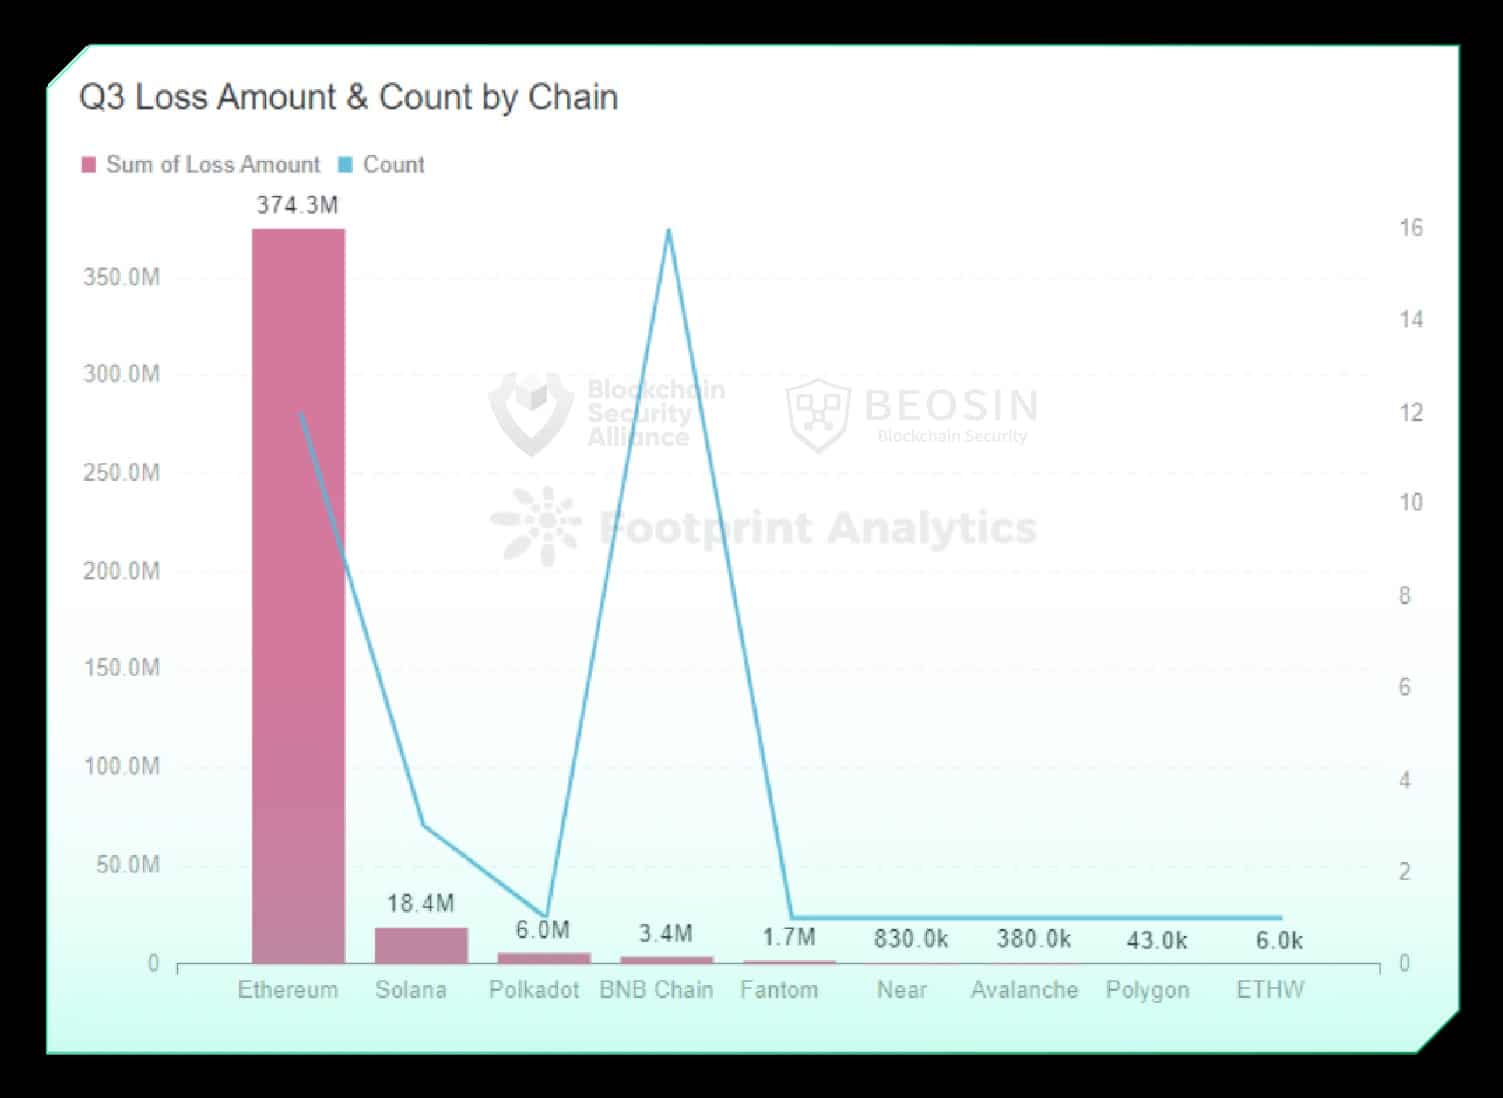 Q3 loss amount & count by chain